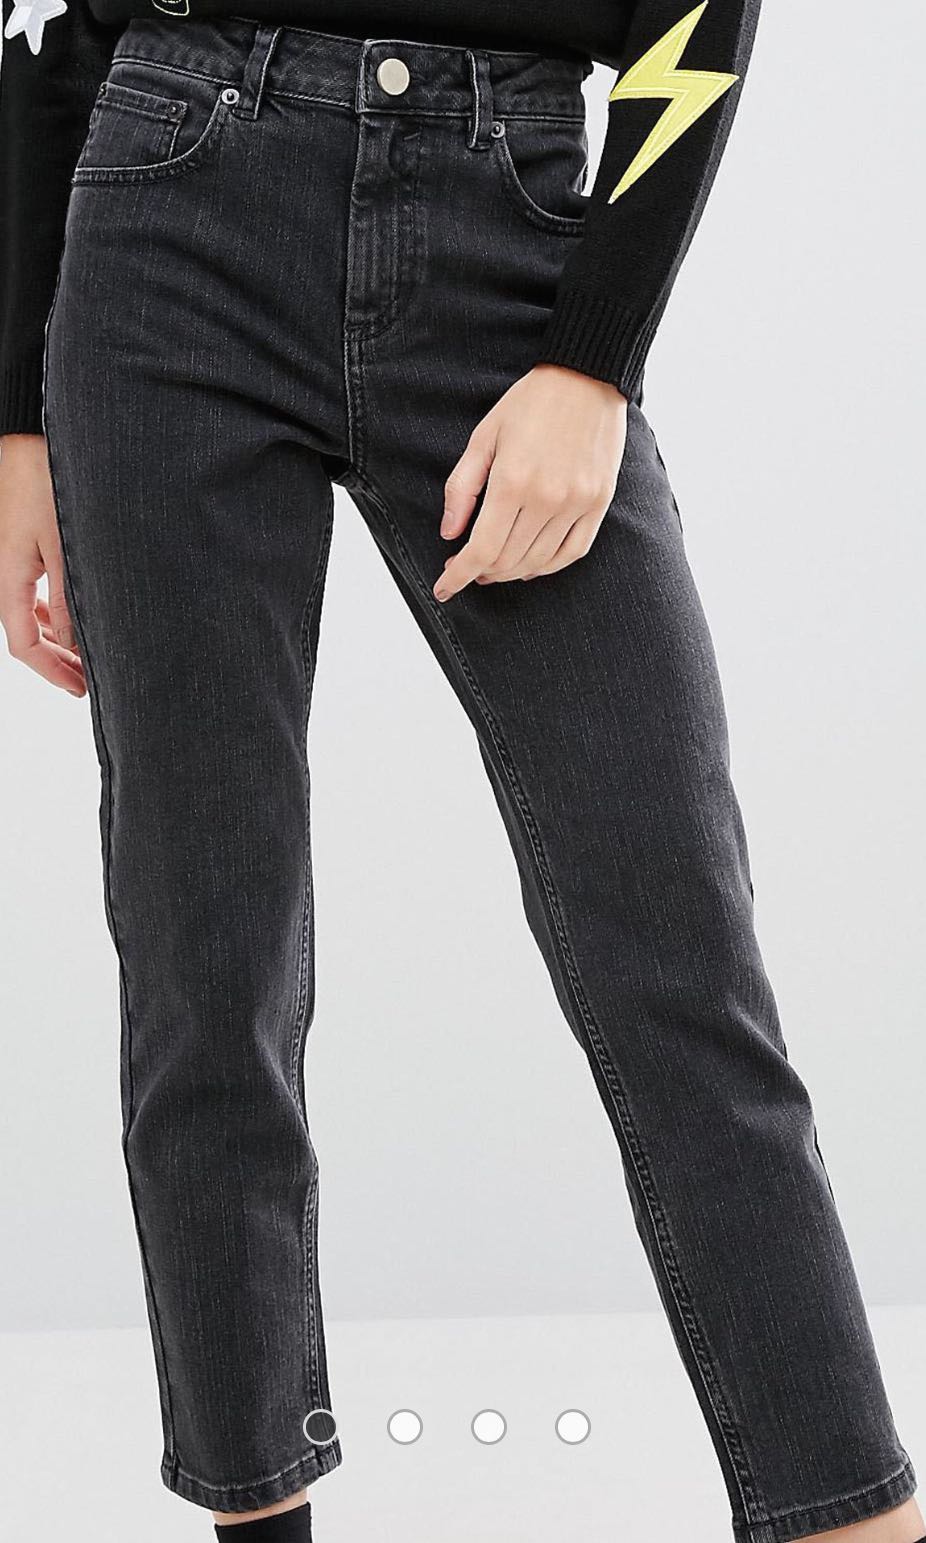 asos farleigh jeans true to size